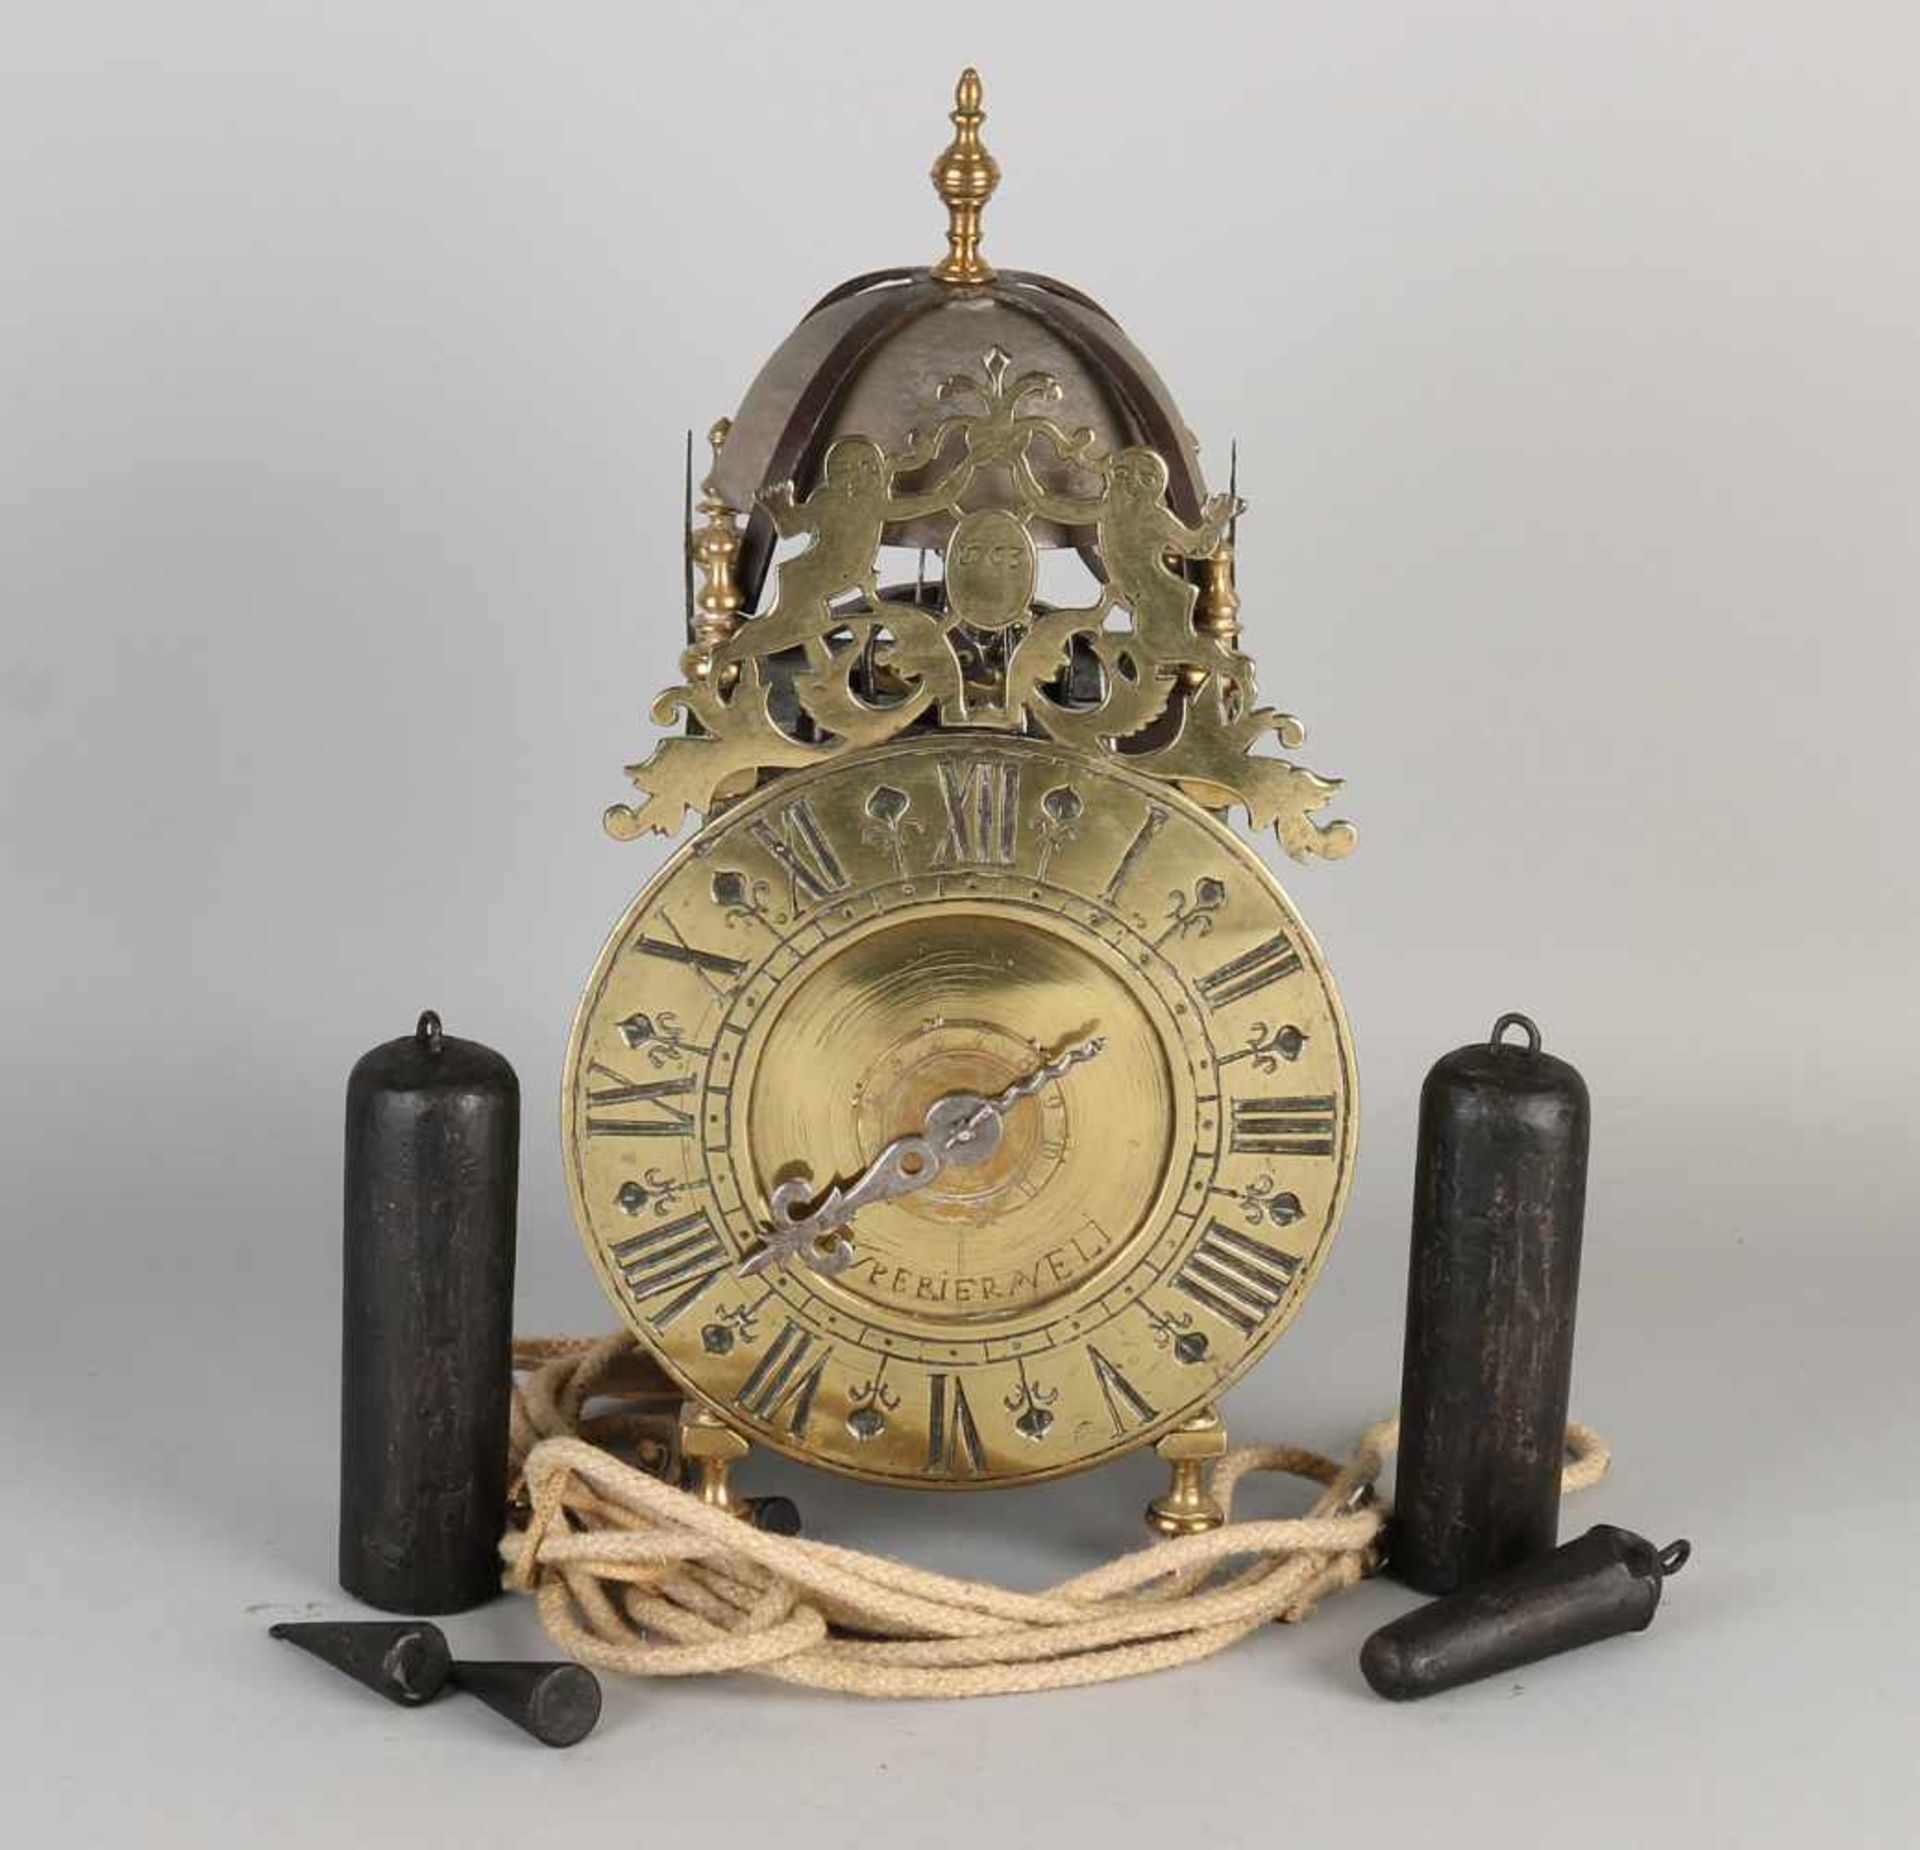 Dated 18th century French brass lantern clock with verge escapement. Anno 1763. Duperier Aveli.